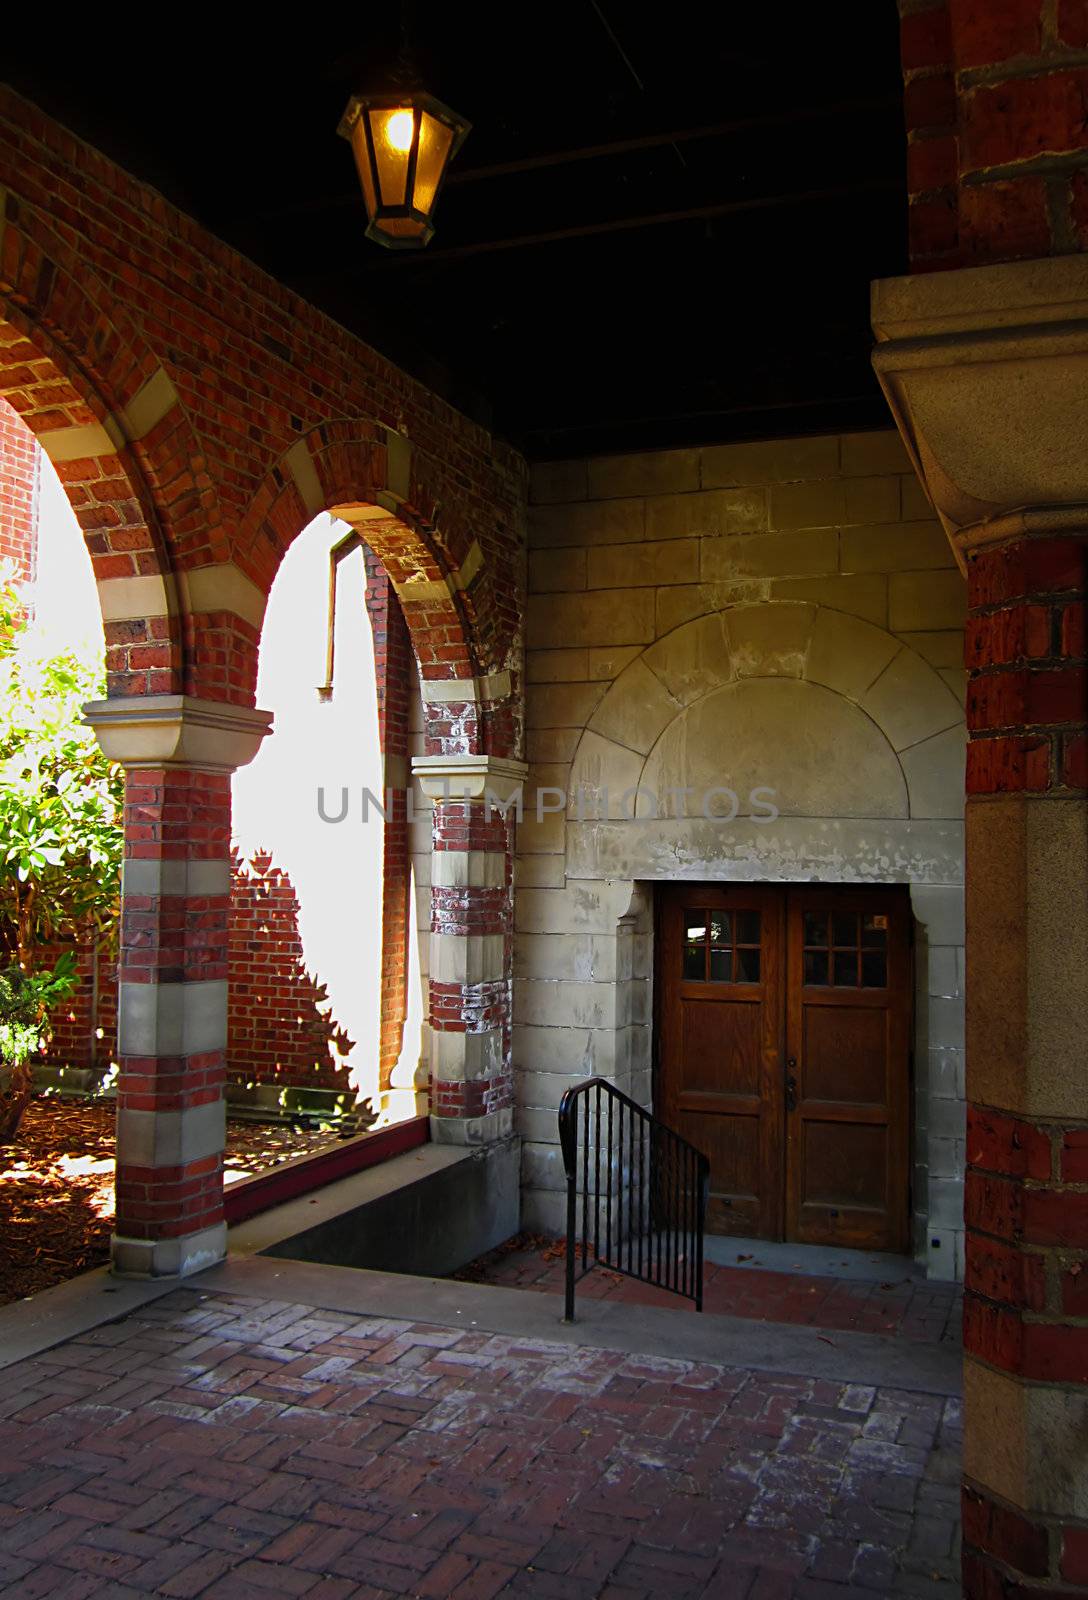 A photograph of an arched walkway of a church detailing its architectural design.